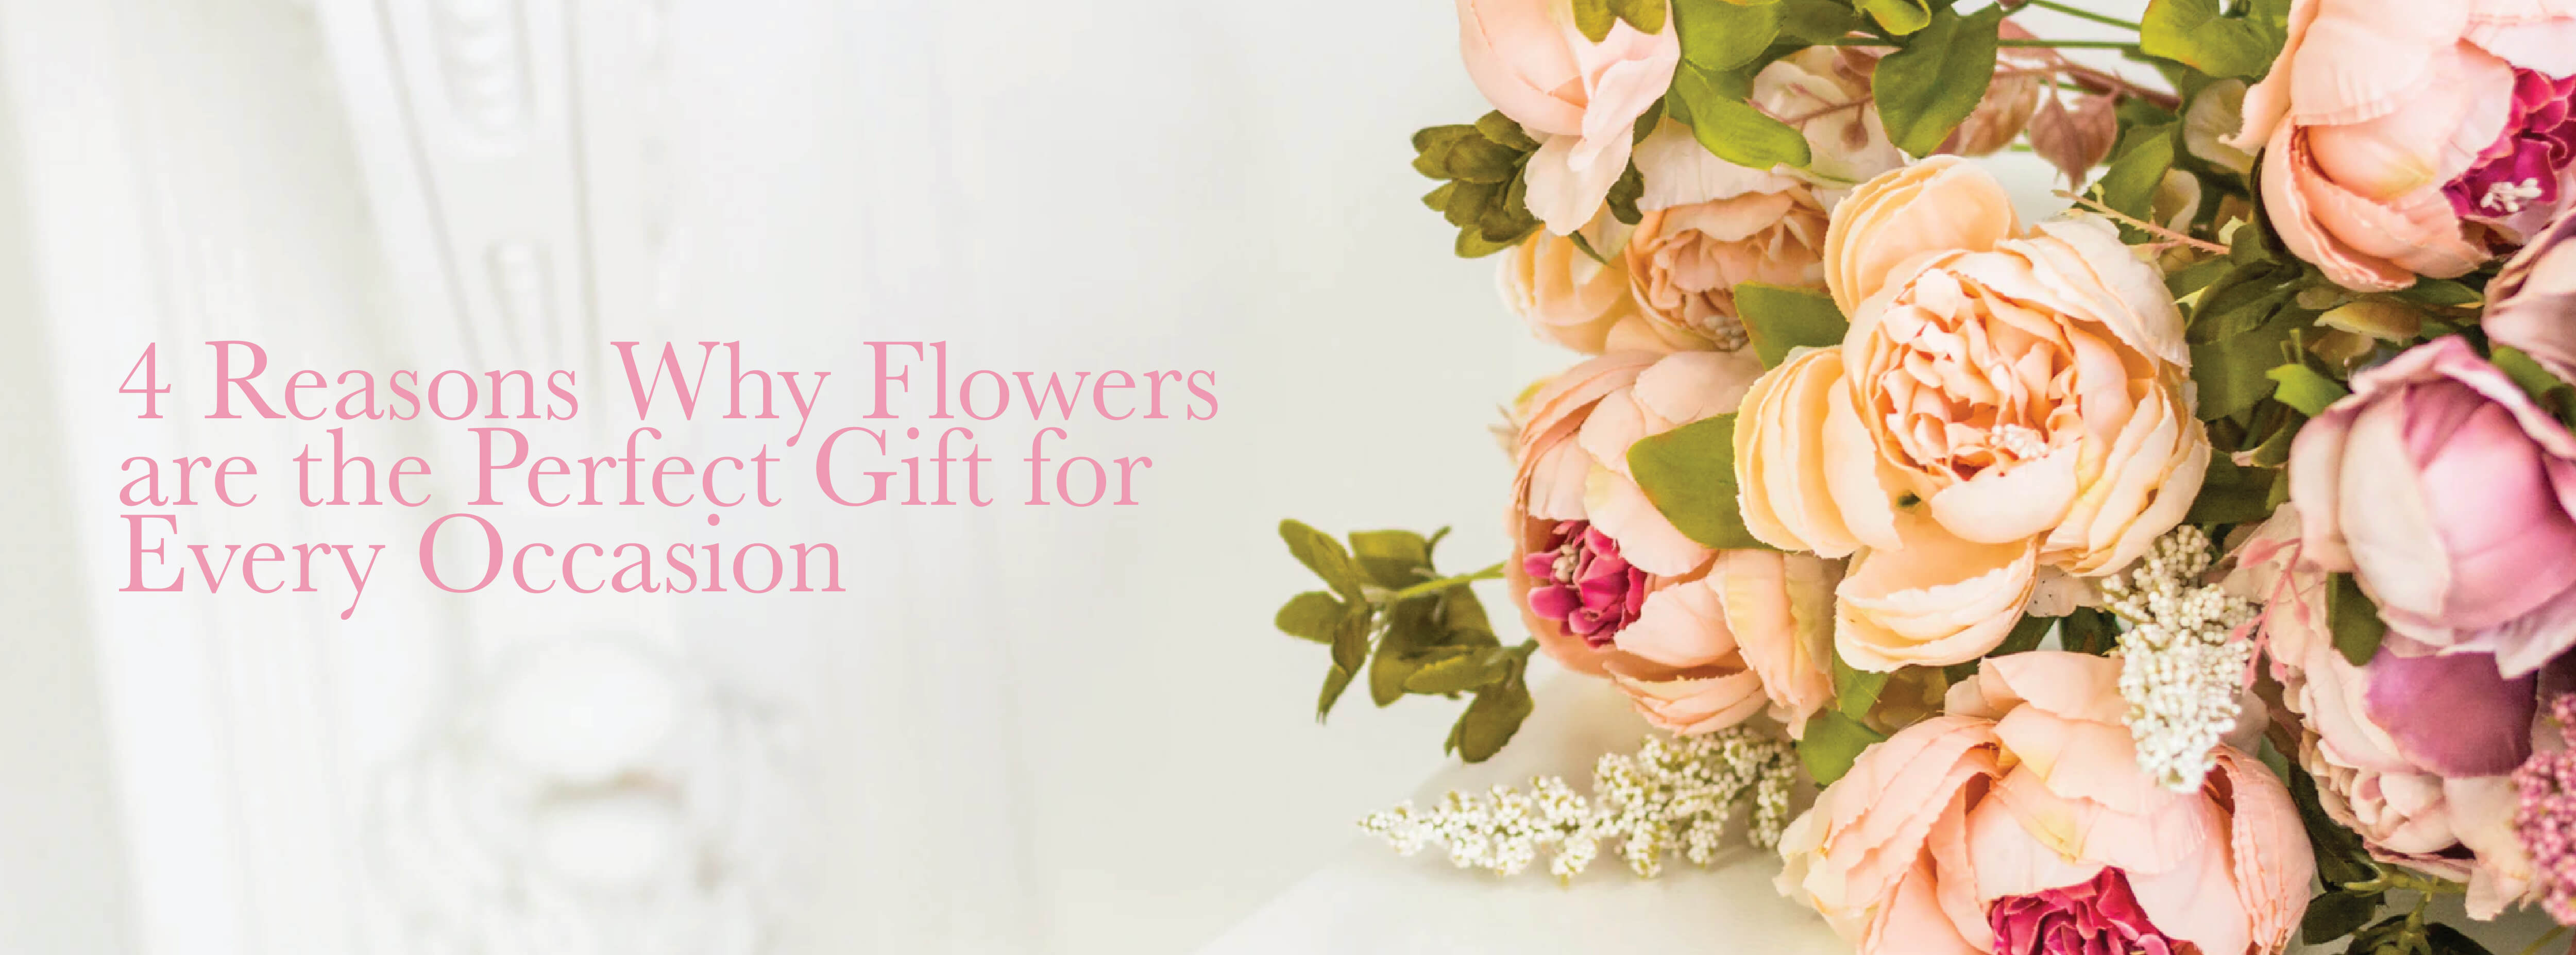 4 Reasons Why Flowers are the Perfect Gift for Every Occasion